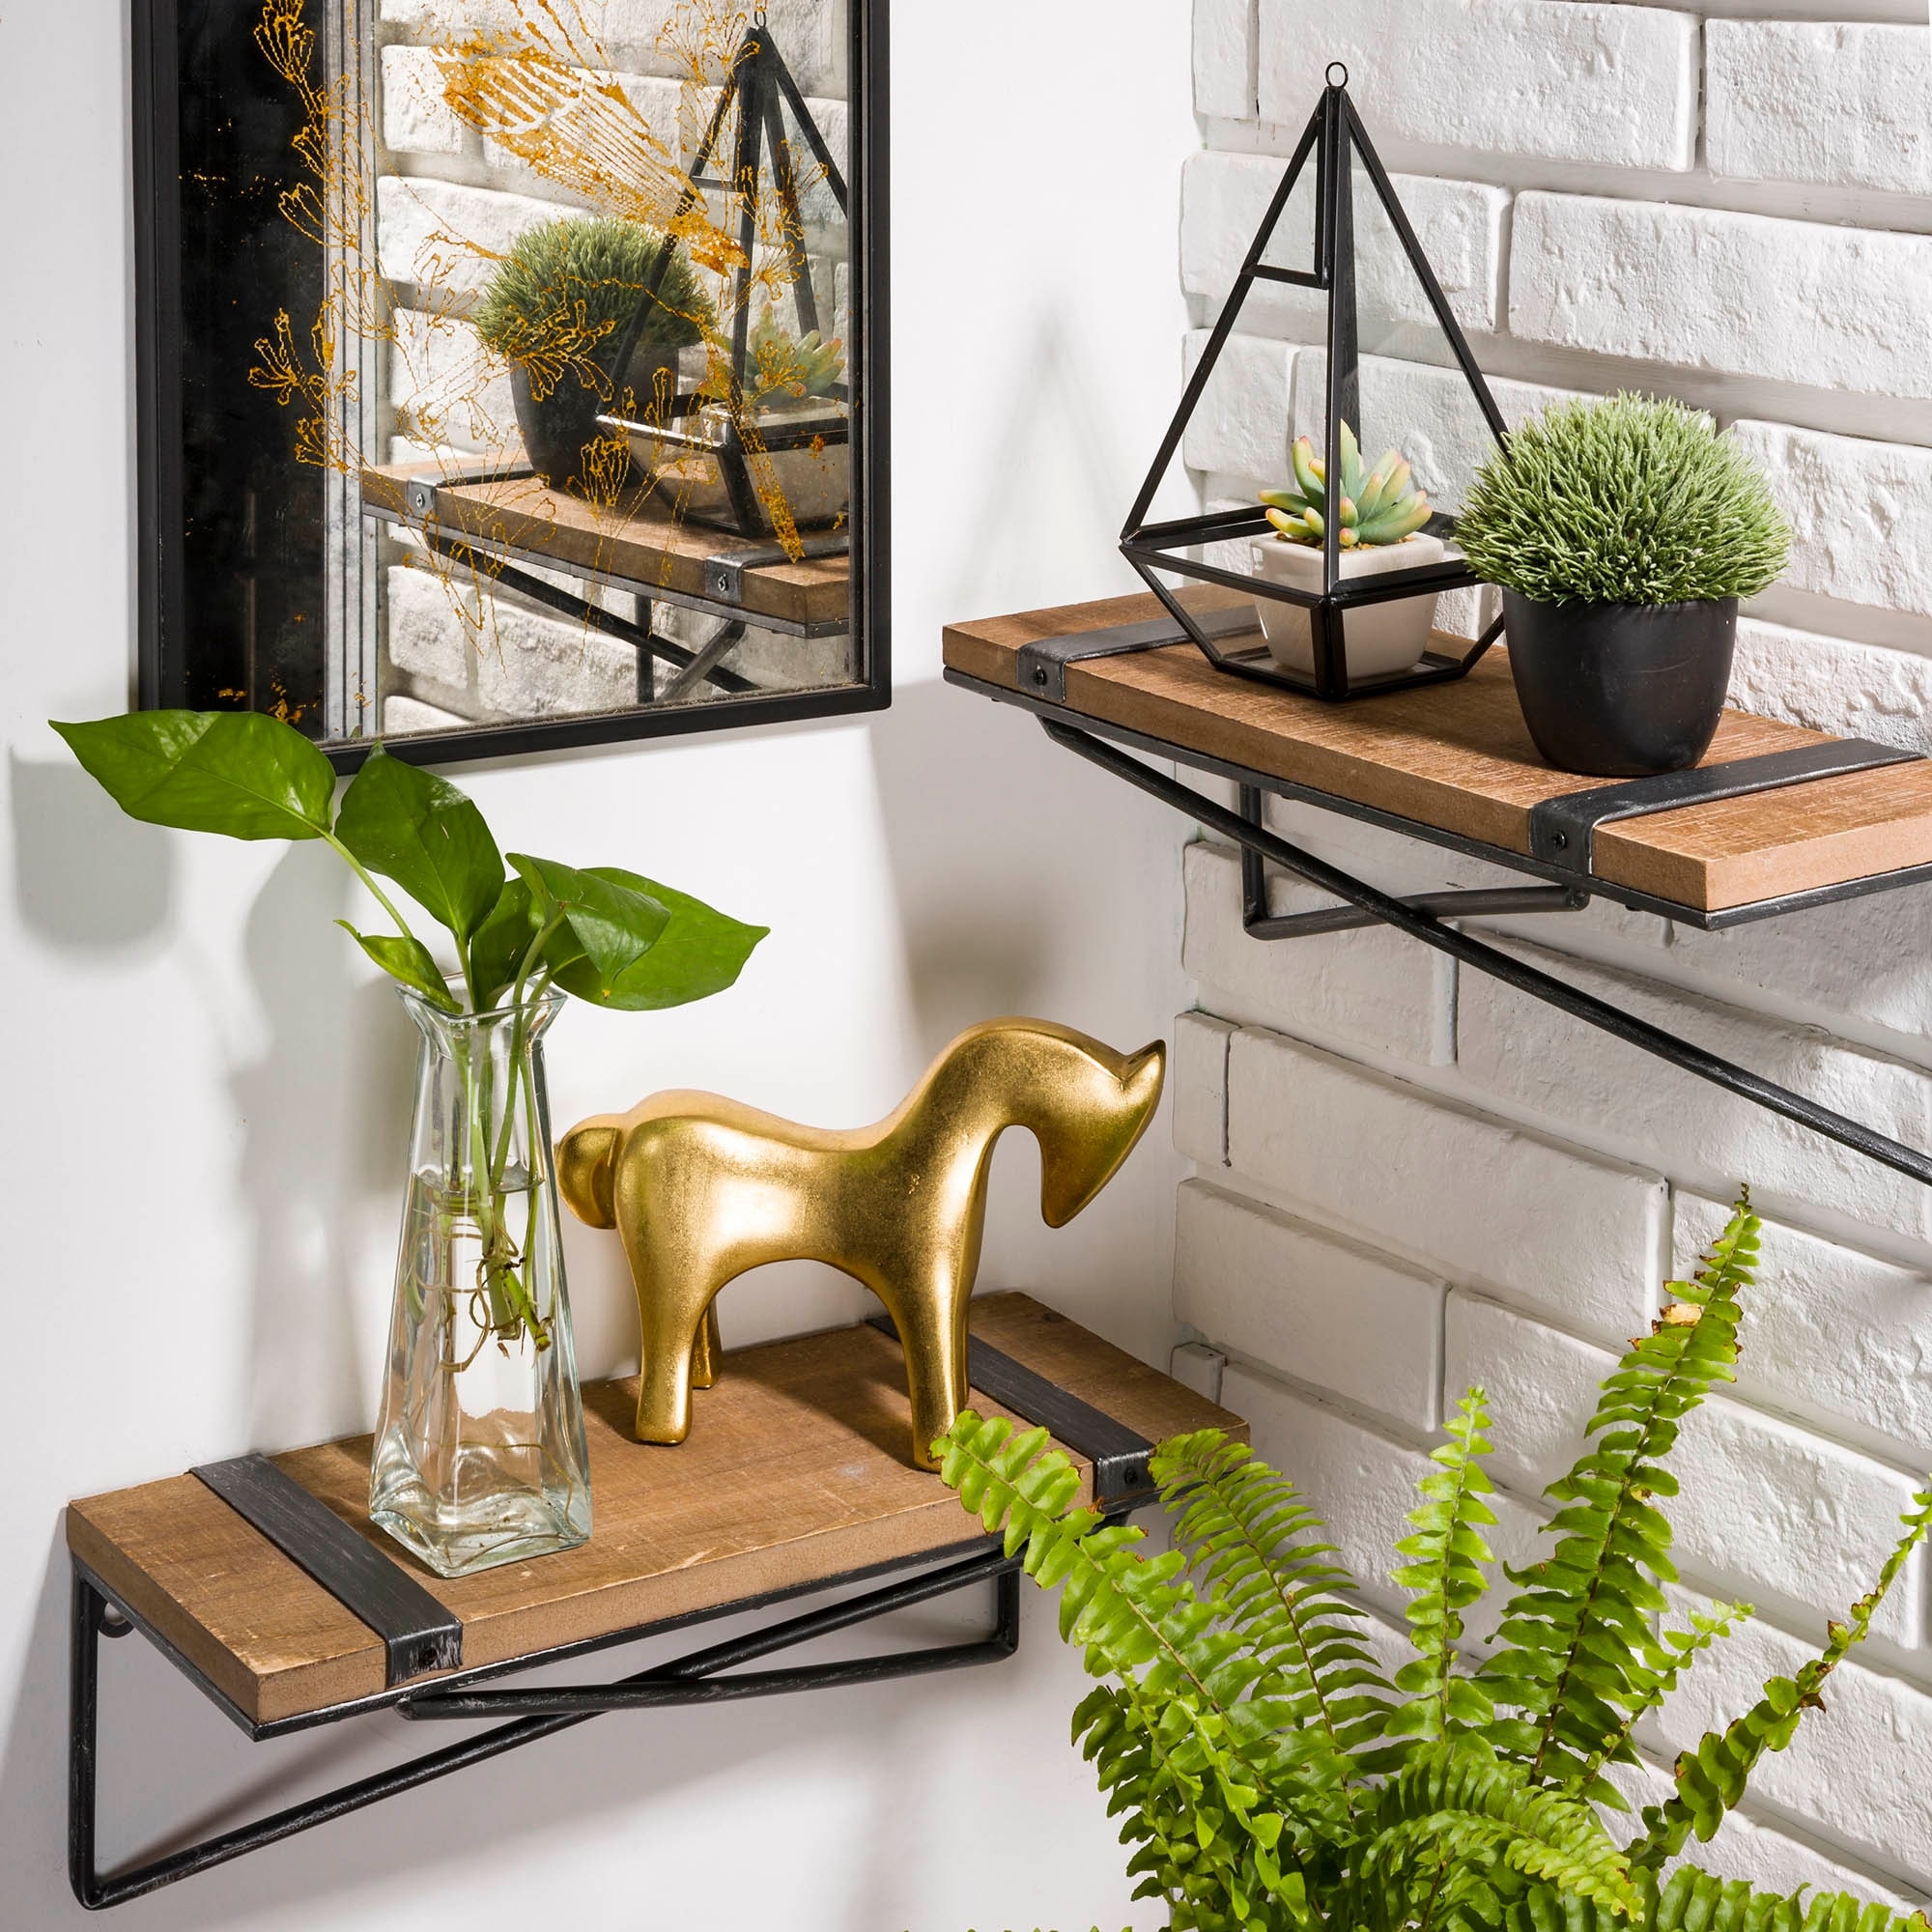 https://ak1.ostkcdn.com/images/products/is/images/direct/af5ff864109e1d03a820dfa7cfe778159e197f3f/Glitzhome-Farmhouse-Rustic-Metal-Wooden-Wall-Shelf-Set-of-two.jpg